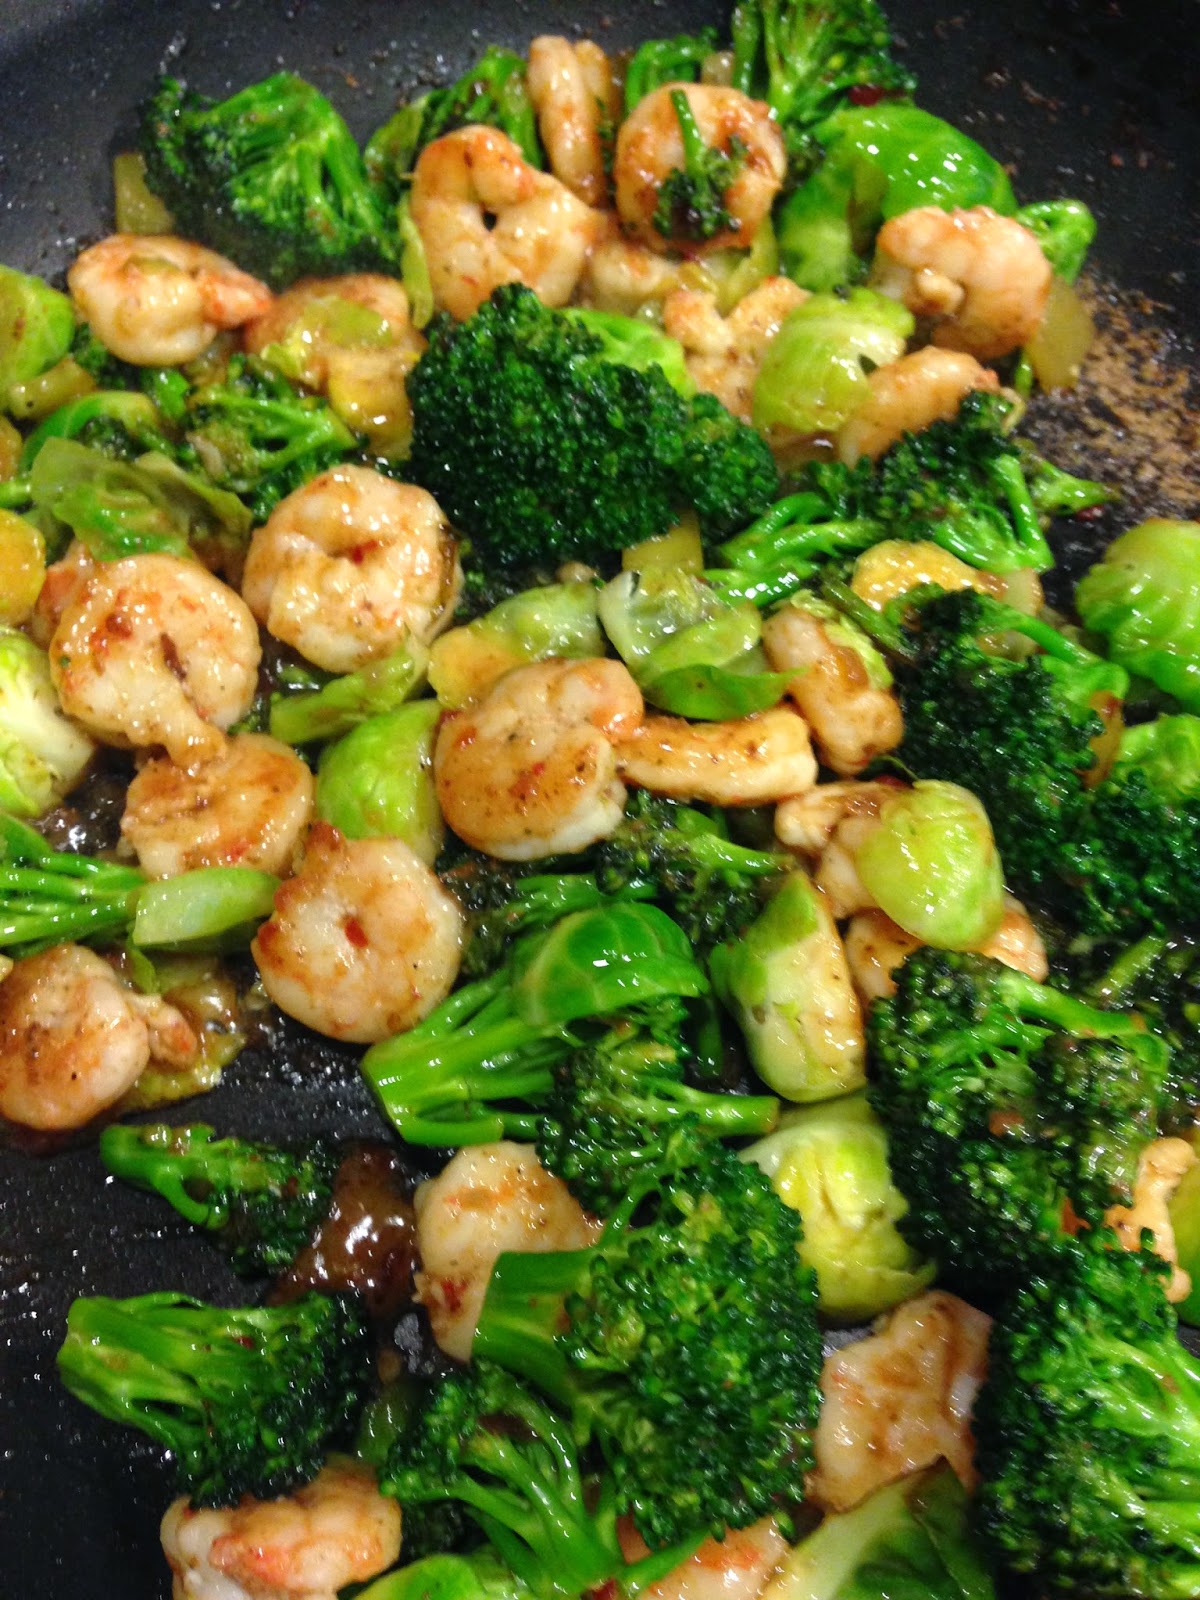 Boomerang Kitchen: Stir Fry Shrimp and Vegetables with Chinese Chili Sauce